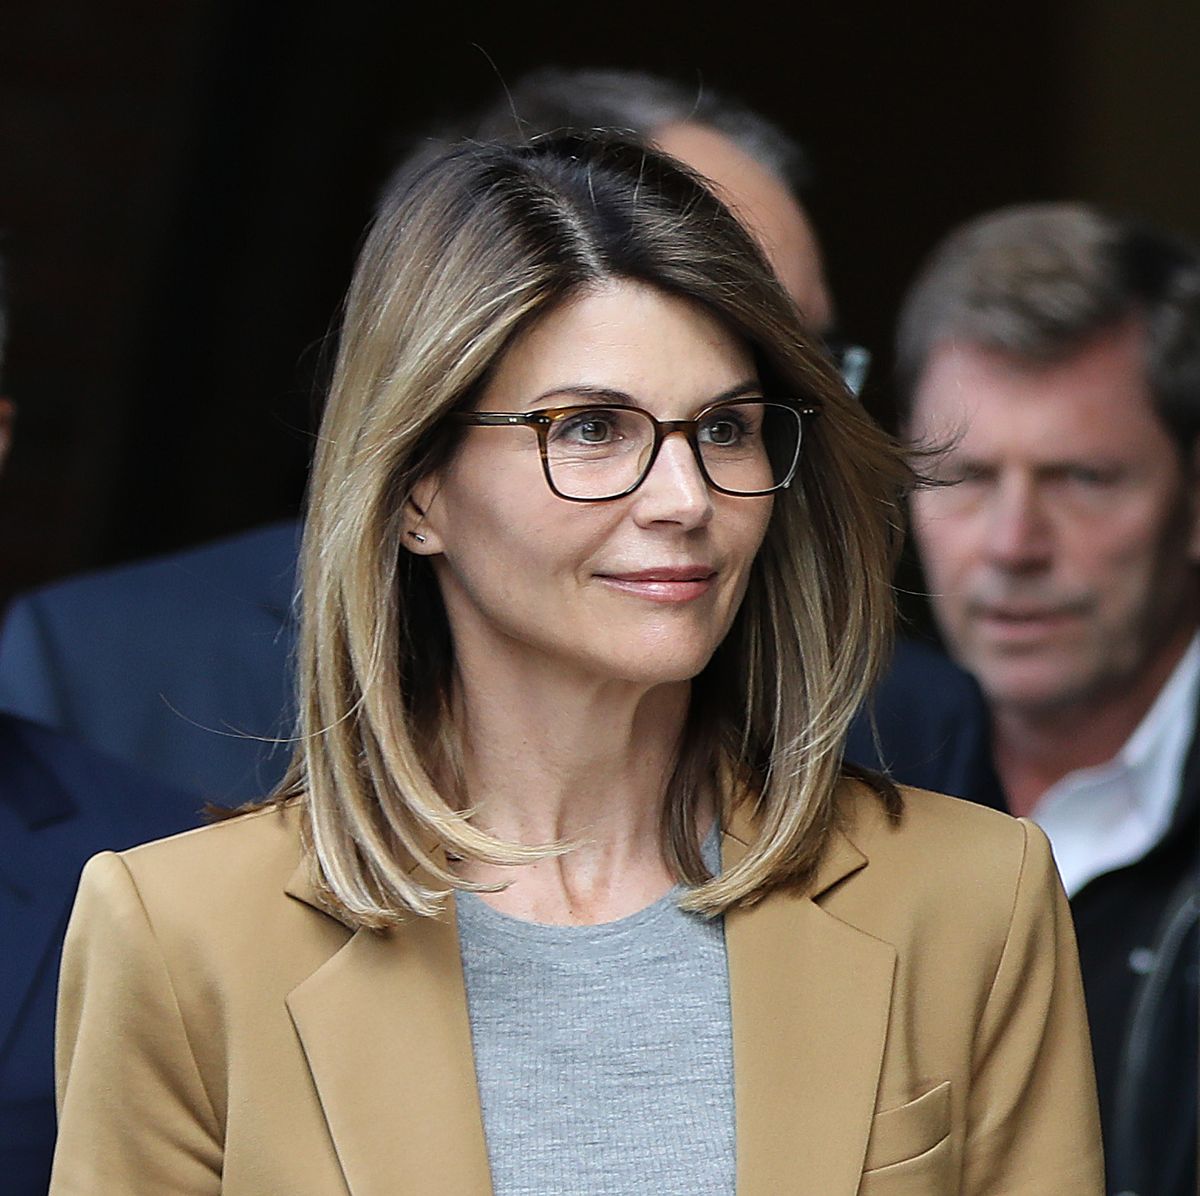 felicity huffman, lori loughlin arrive at boston court for college cheating case